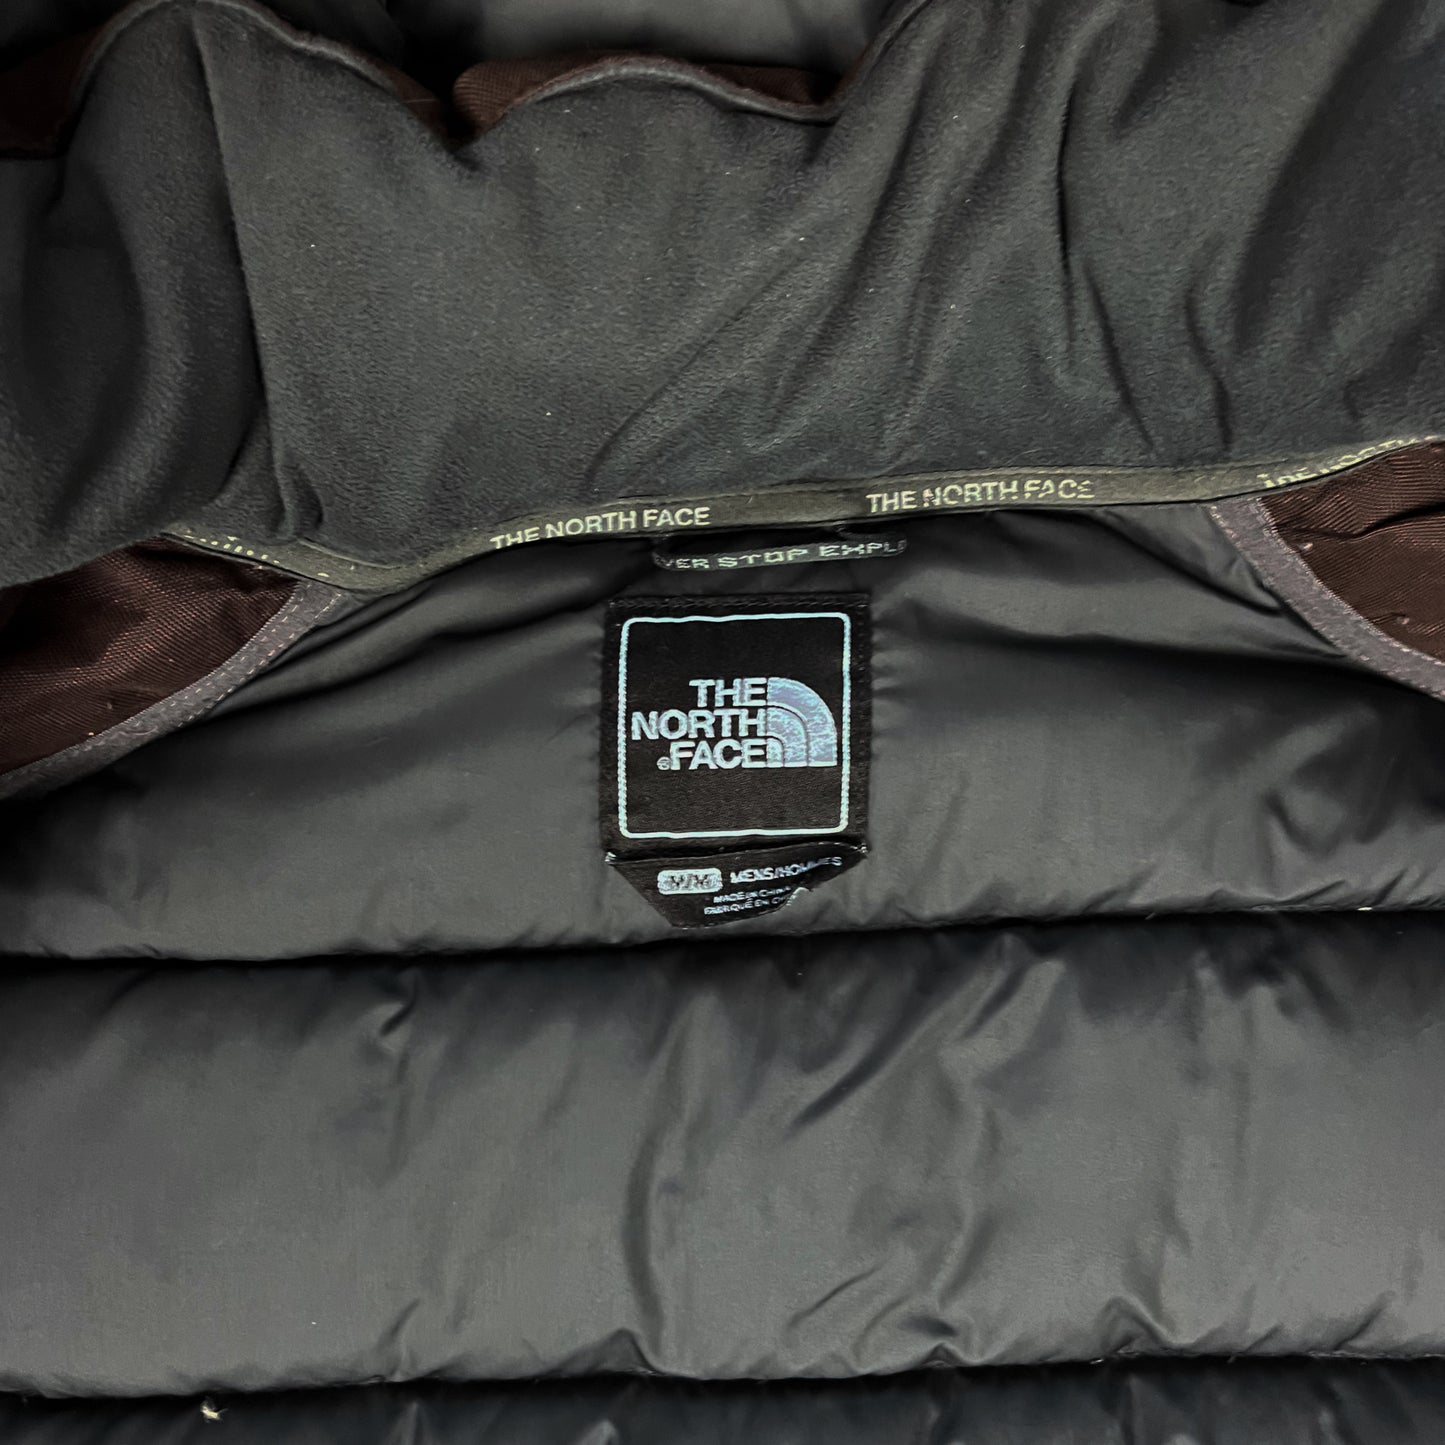 The North Face HyVent Jacket